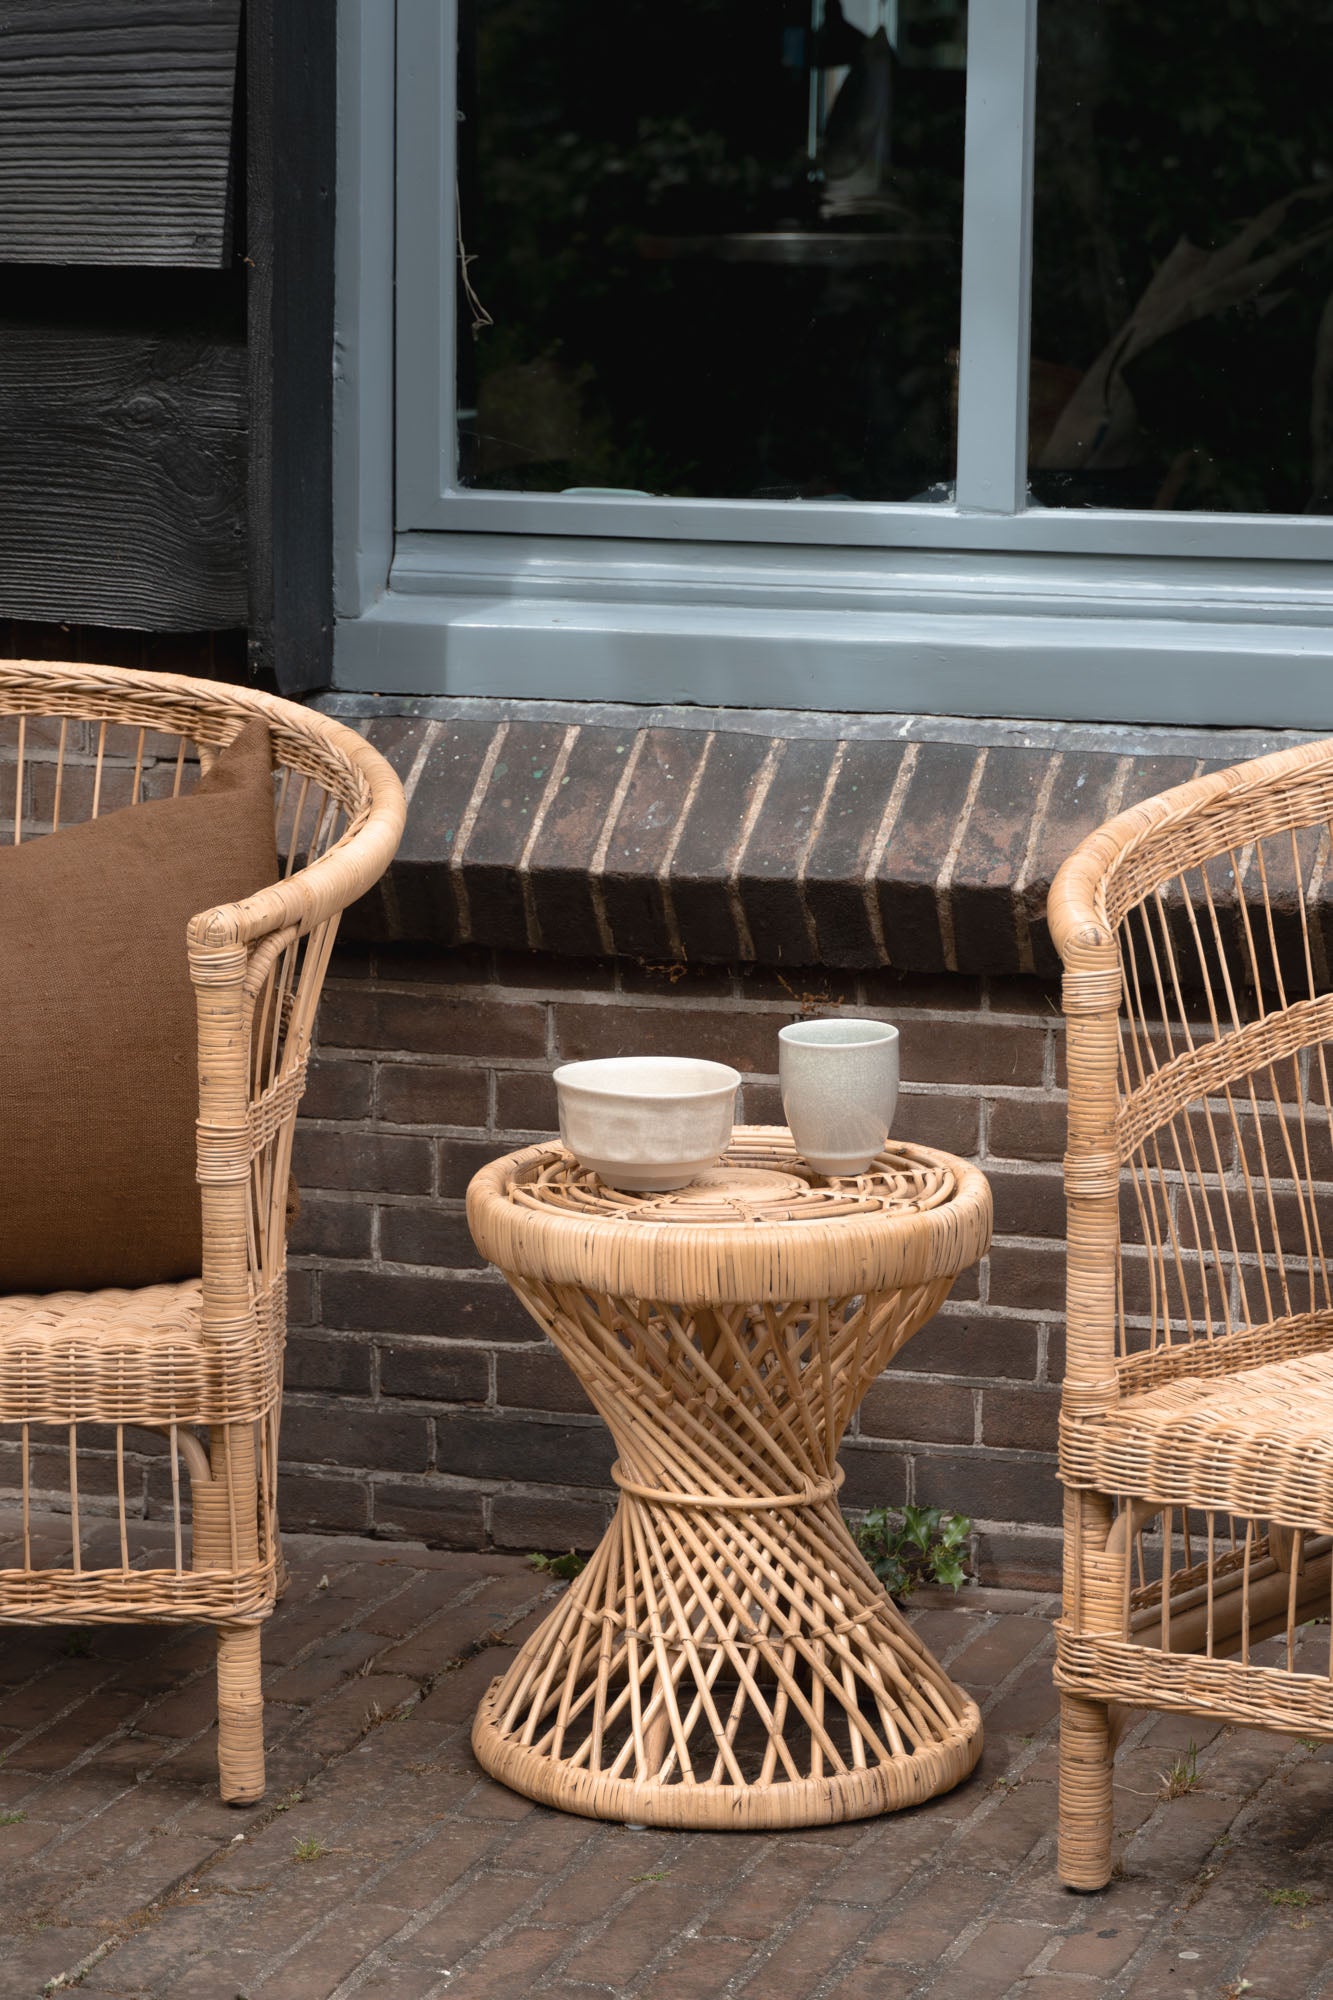 Detail shot of the Rattan Lounge Set by Tine K Home.